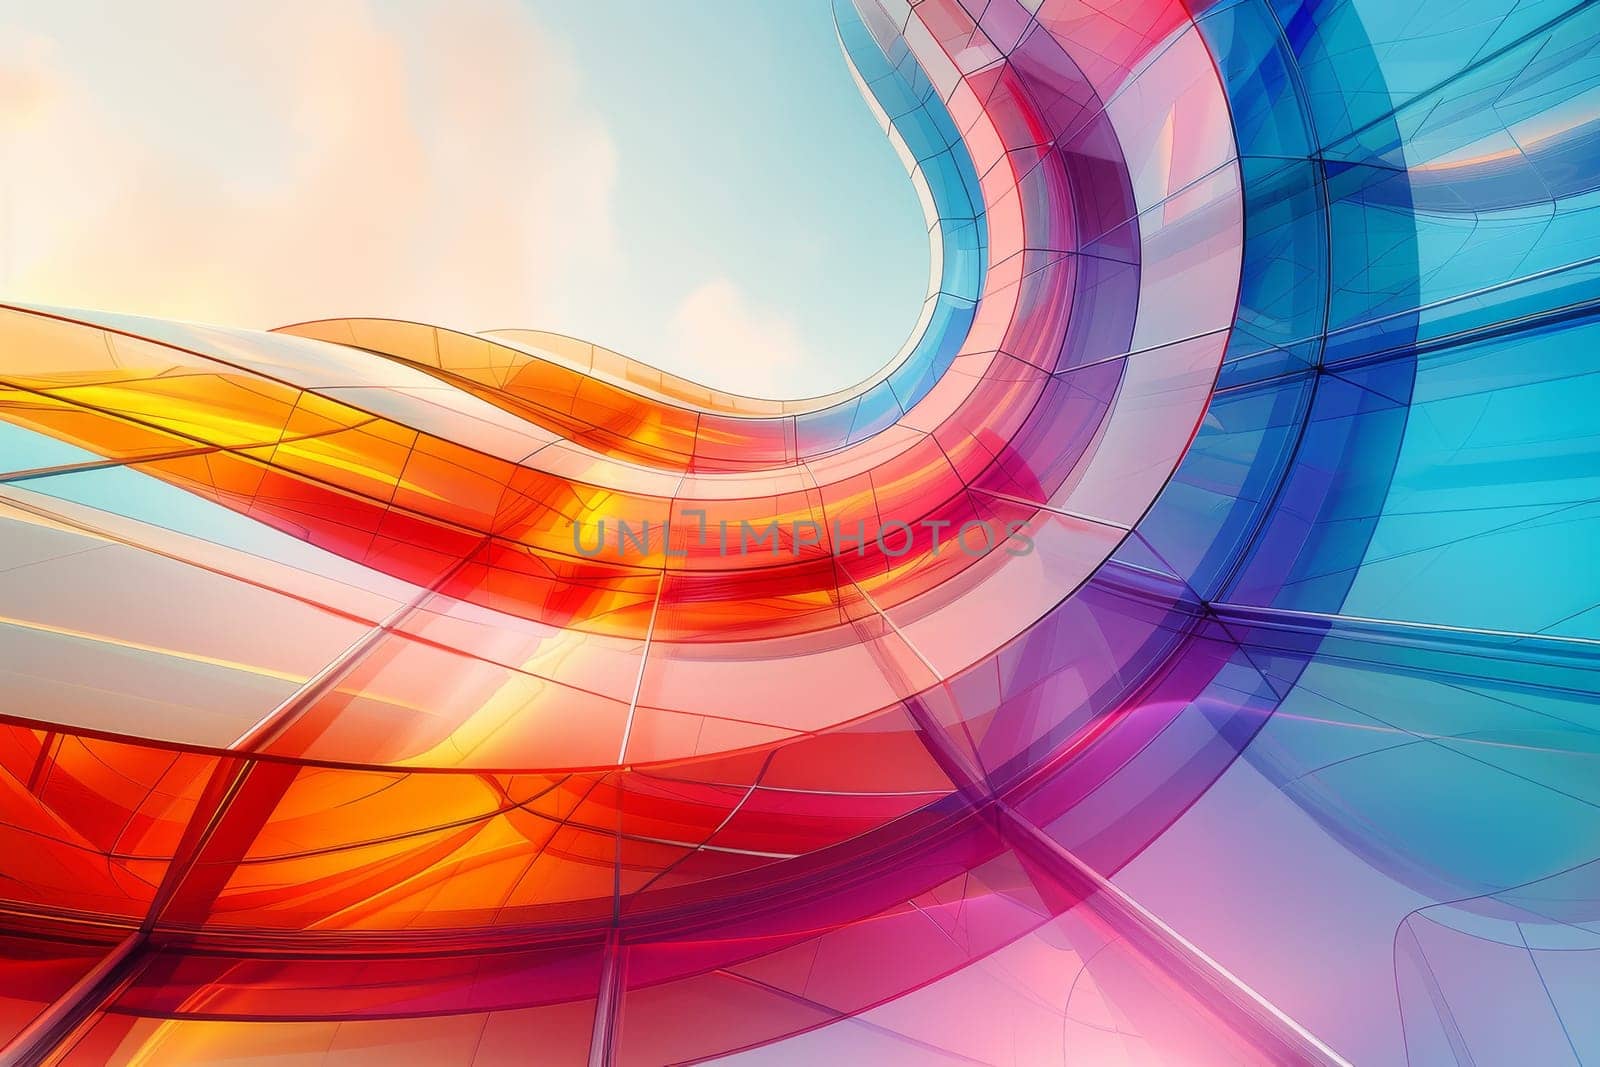 A colorful, abstract design with a red, yellow, and blue swirl by itchaznong